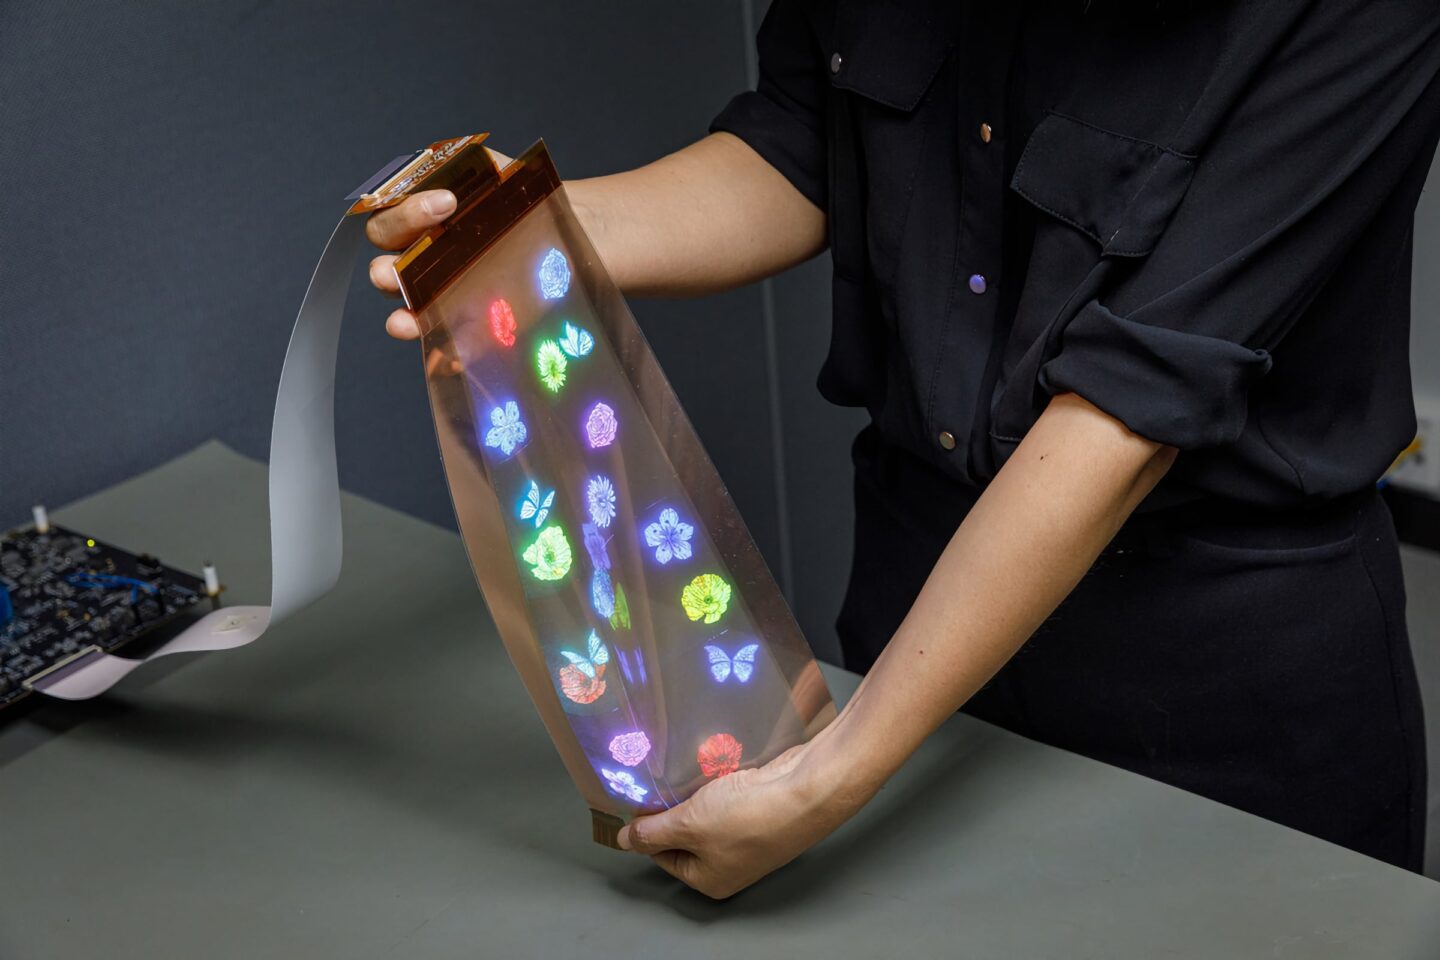 LG Display showed the world's first flexible display that can be stretched